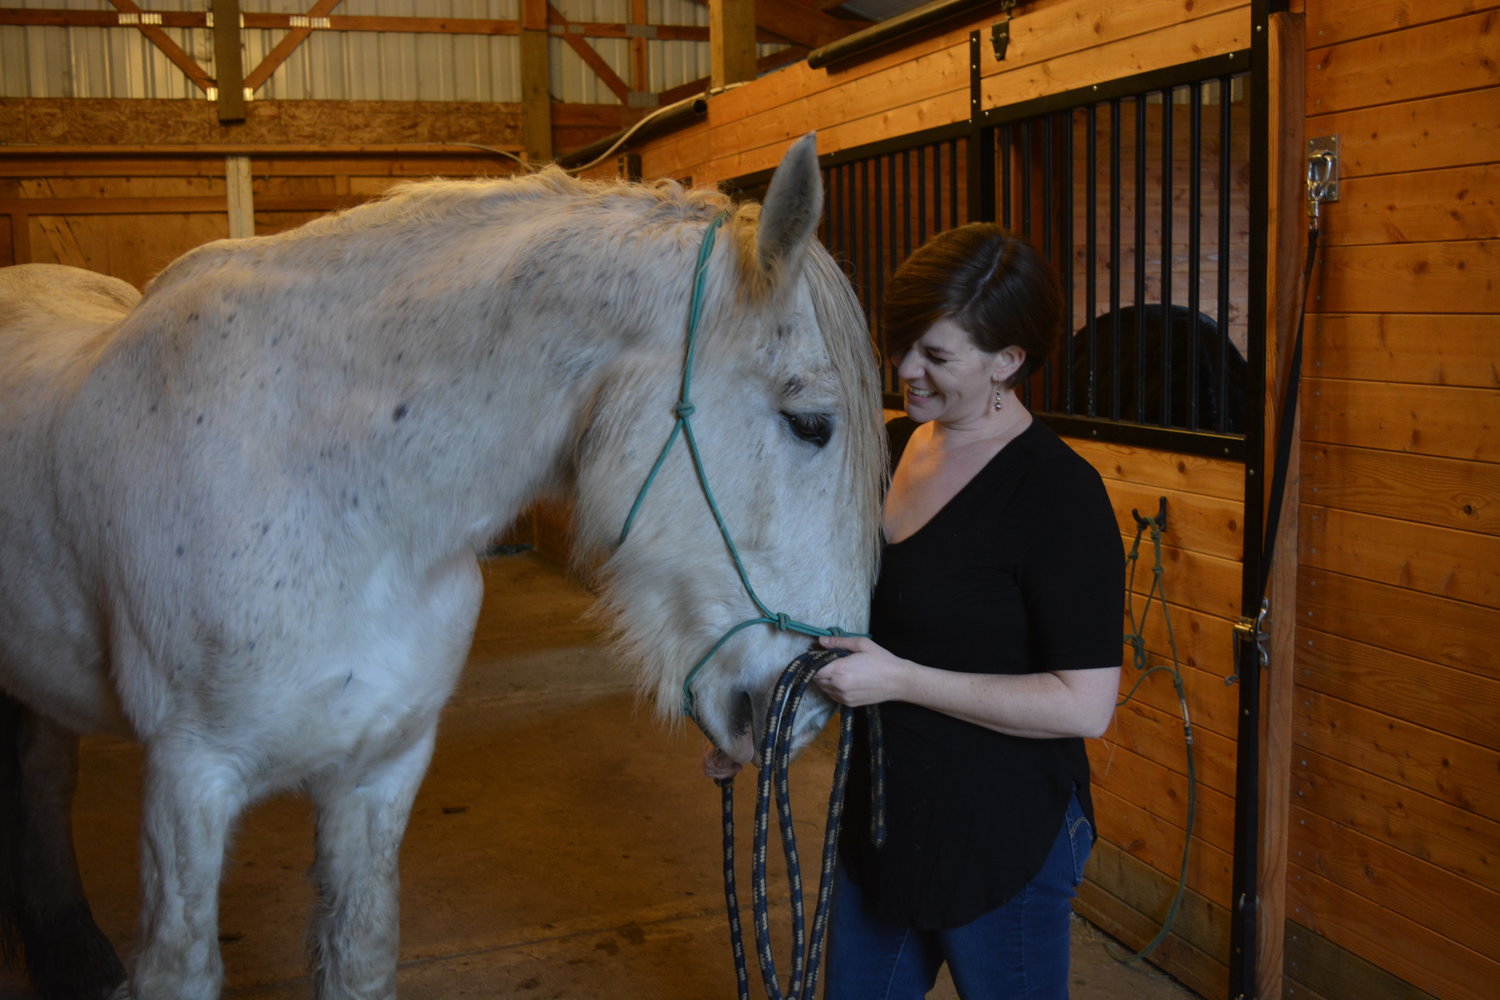 Meghan Hindi stands with a therapy horse, Avalon. The duo work together as a part of The Healing You Can Do program for trauma survivors.